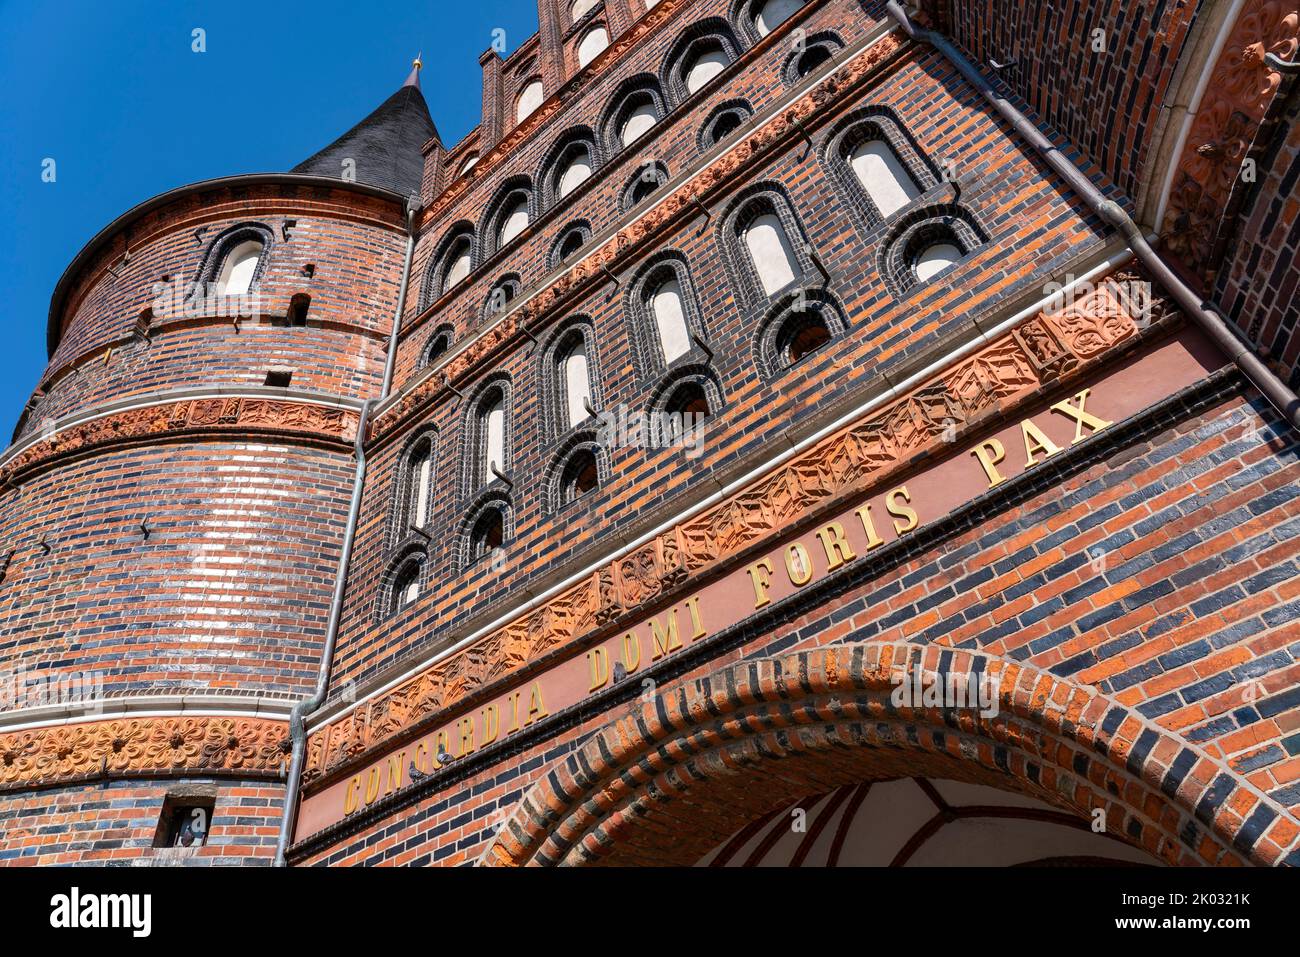 The Holsten Gate is the landmark of the city, and besides the Castle Gate, the only preserved city gate of Lübeck. Since 1950, the rooms of the Holsten Gate have housed the City History Museum. The late Gothic building is part of the former Lübeck city fortifications. Inscription on the Holsten Gate field side. 'Concordia domi foris pax' 'Concord inside and peace outside'. Stock Photo